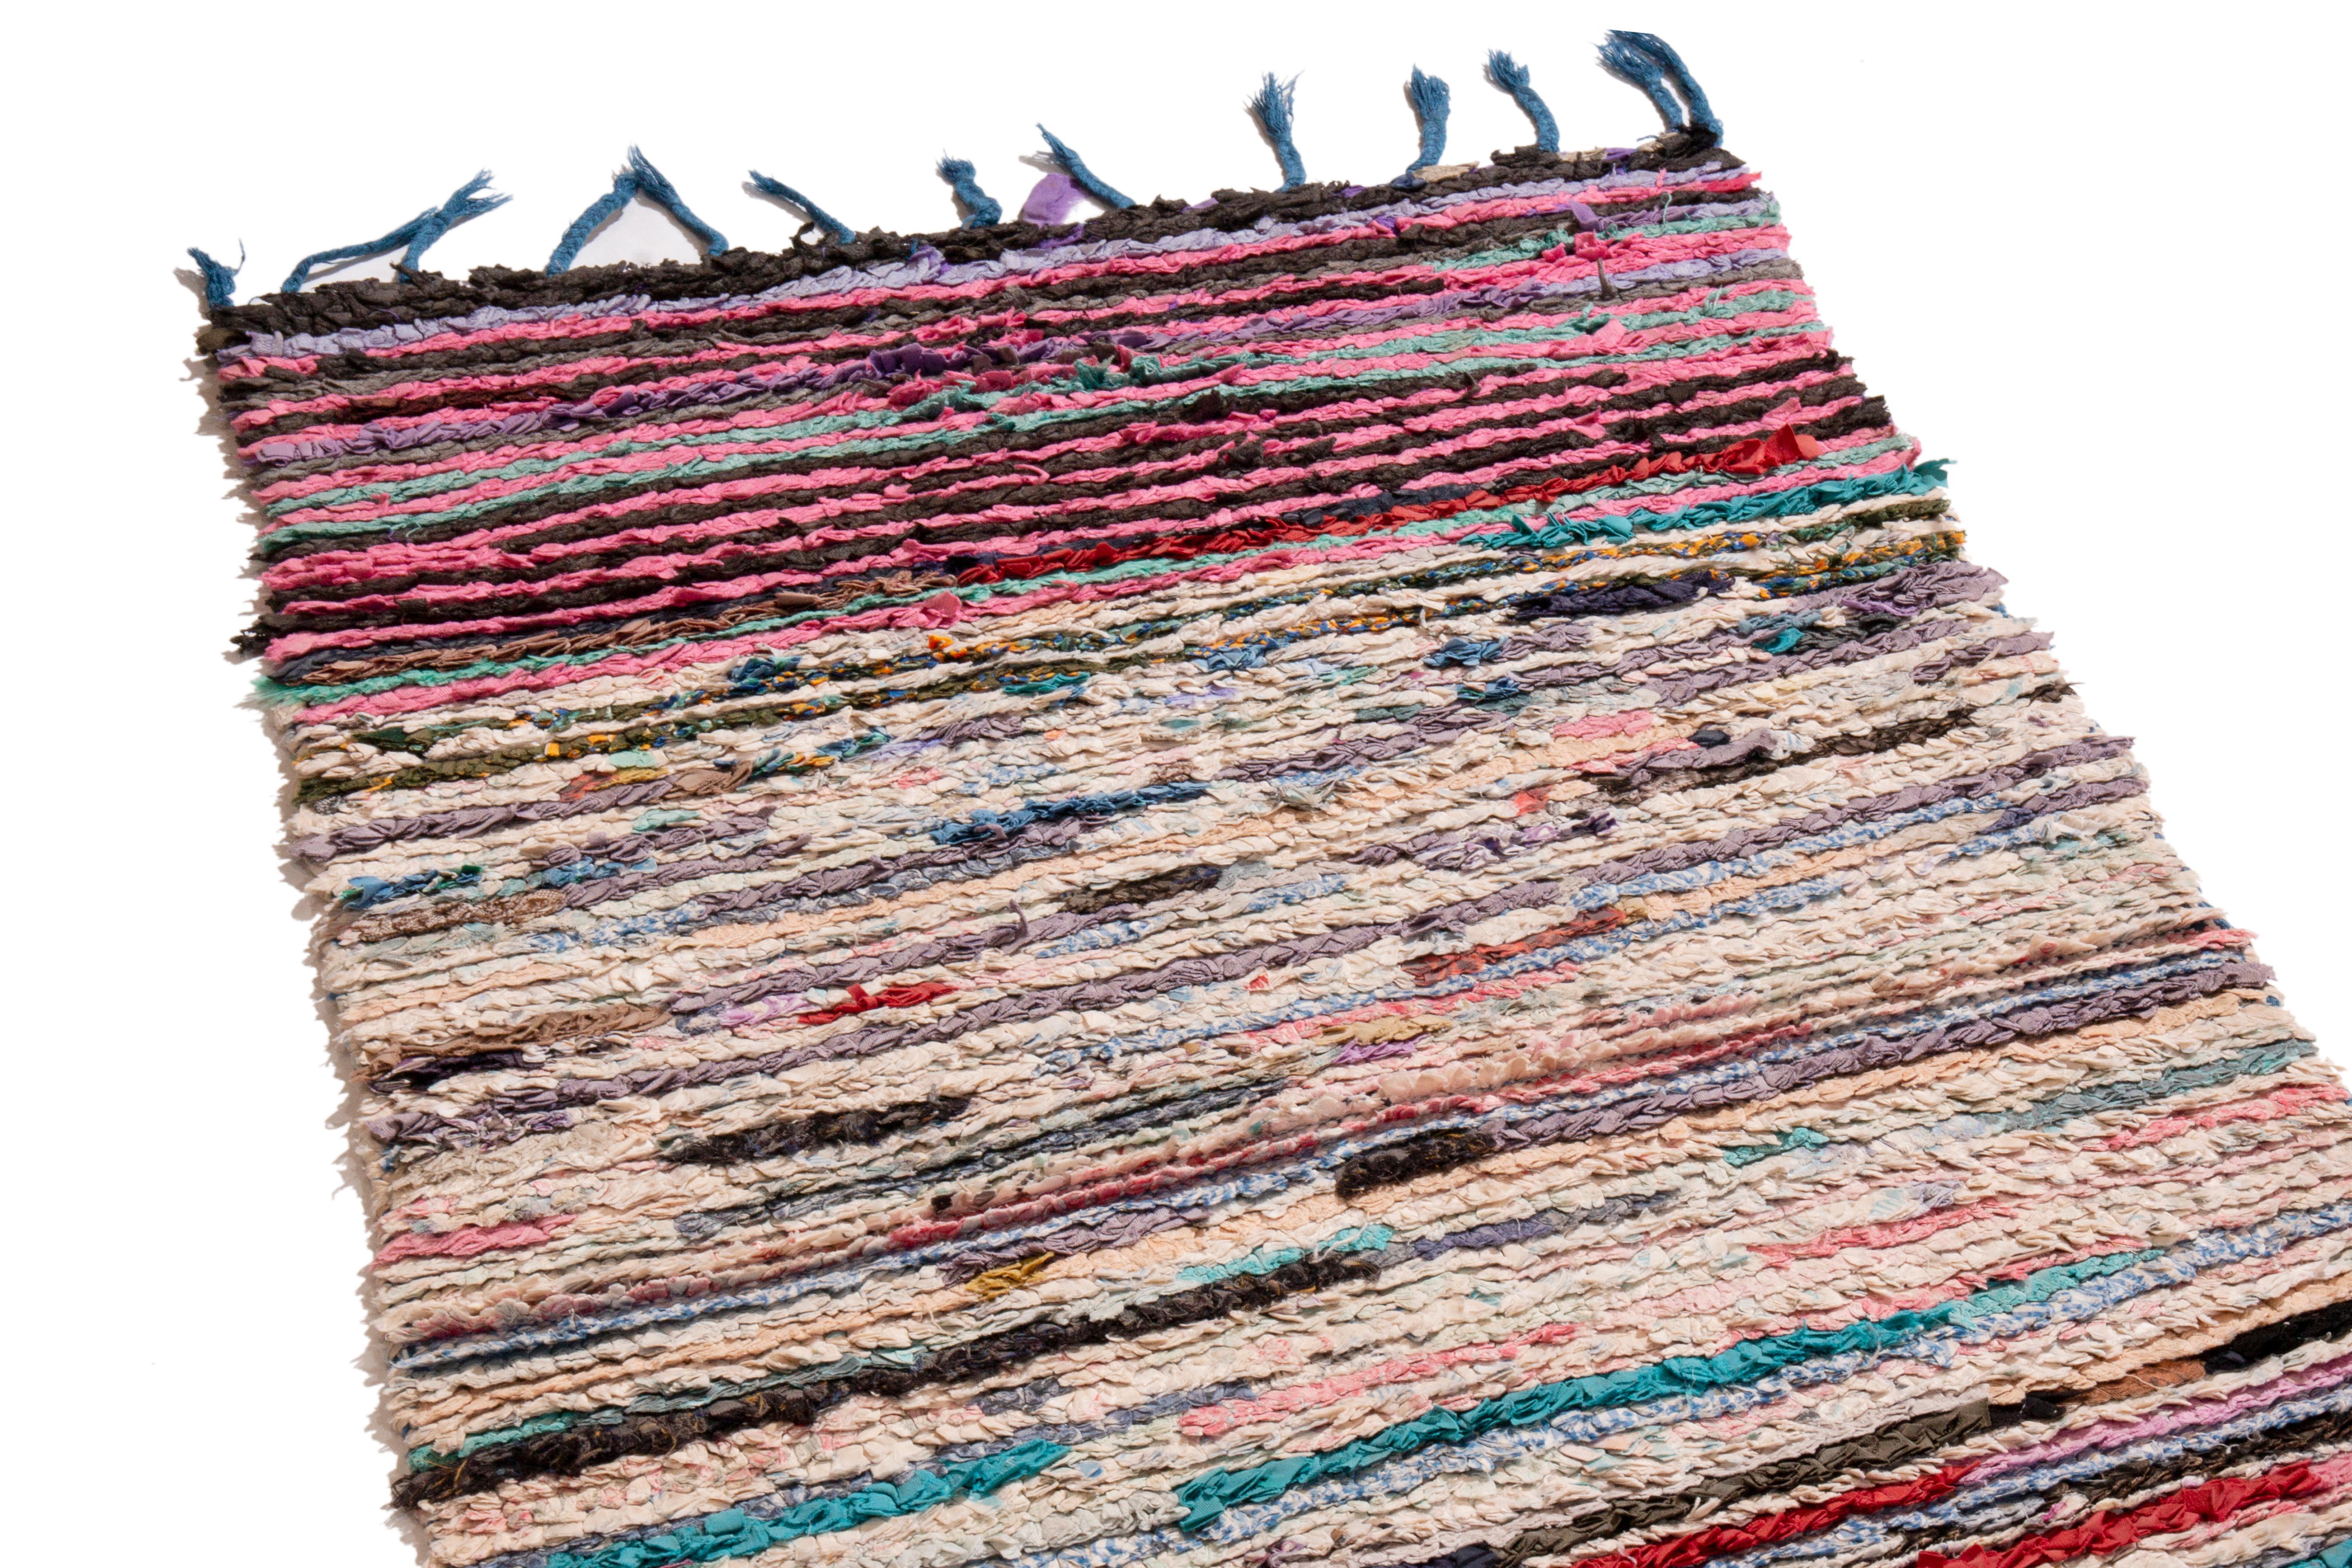 Originating from Morocco in 1950, this vintage mid-century Moroccan wool runner employs a unique distribution of color ways. Hand knotted in high quality wool, the all-over field design creates a distinguished visual gravity in the concentration of